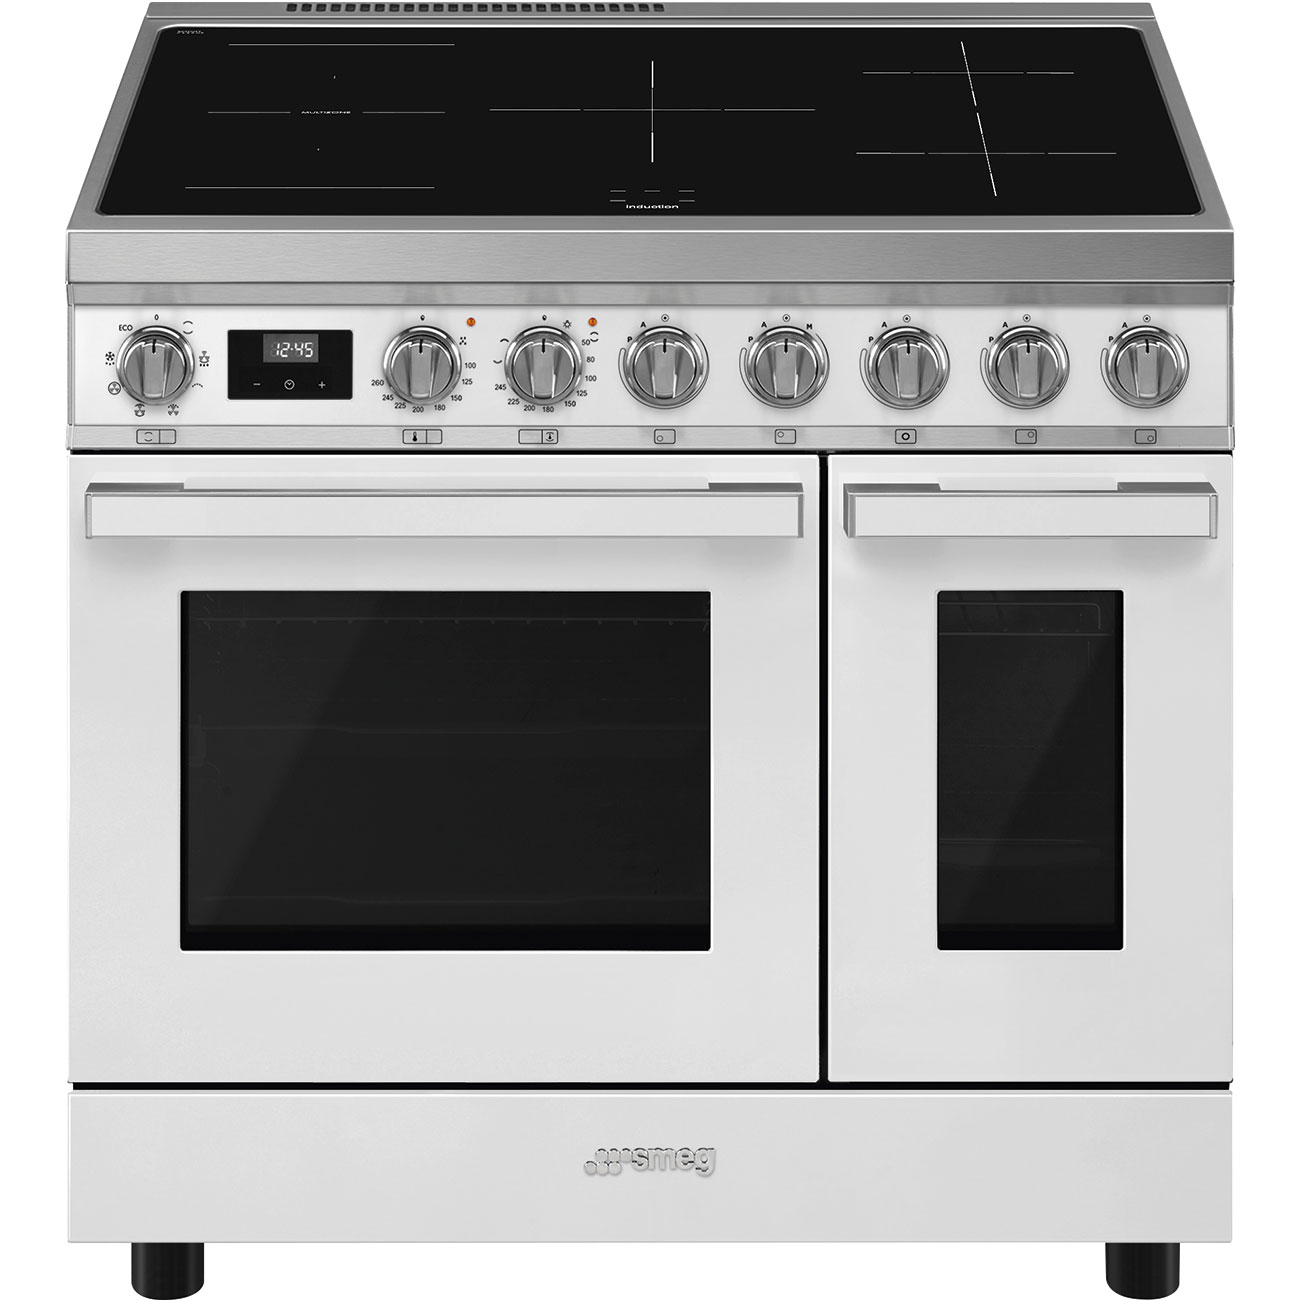 Smeg White Cooker with Induction Hob_1